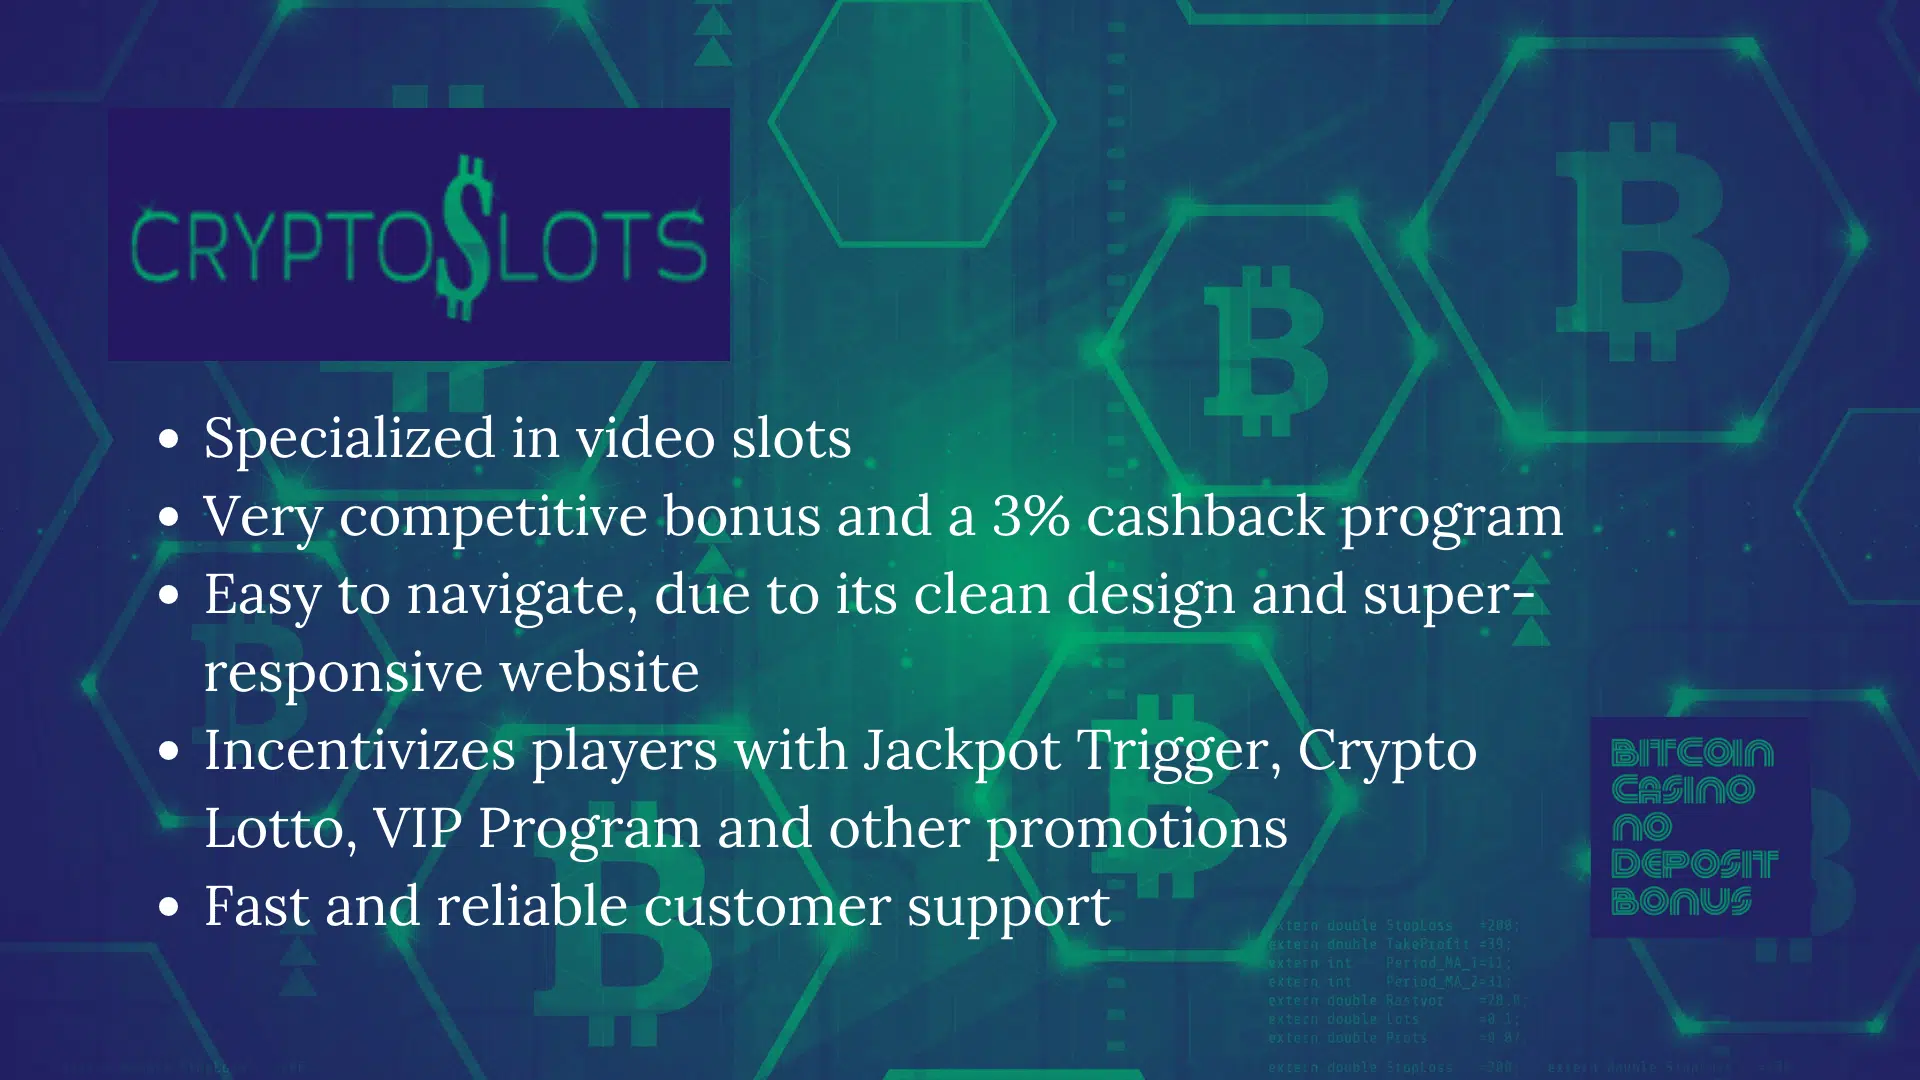 You are currently viewing Crypto Slots Promo Codes – CryptoSlots.com Free Spins Bonus